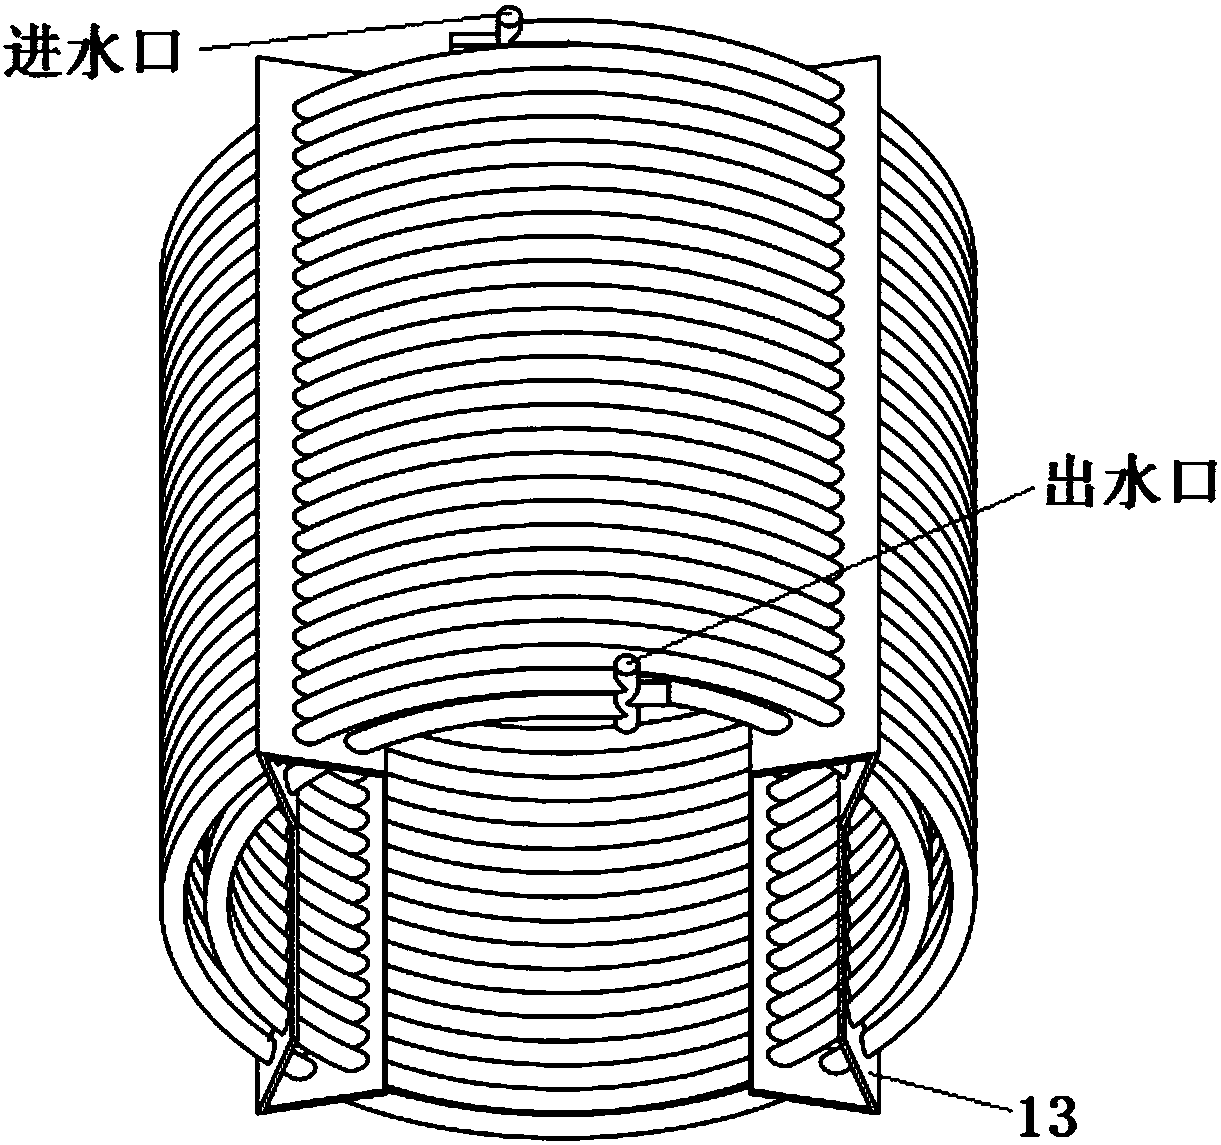 Defogging water-collecting device used for wet cooling tower